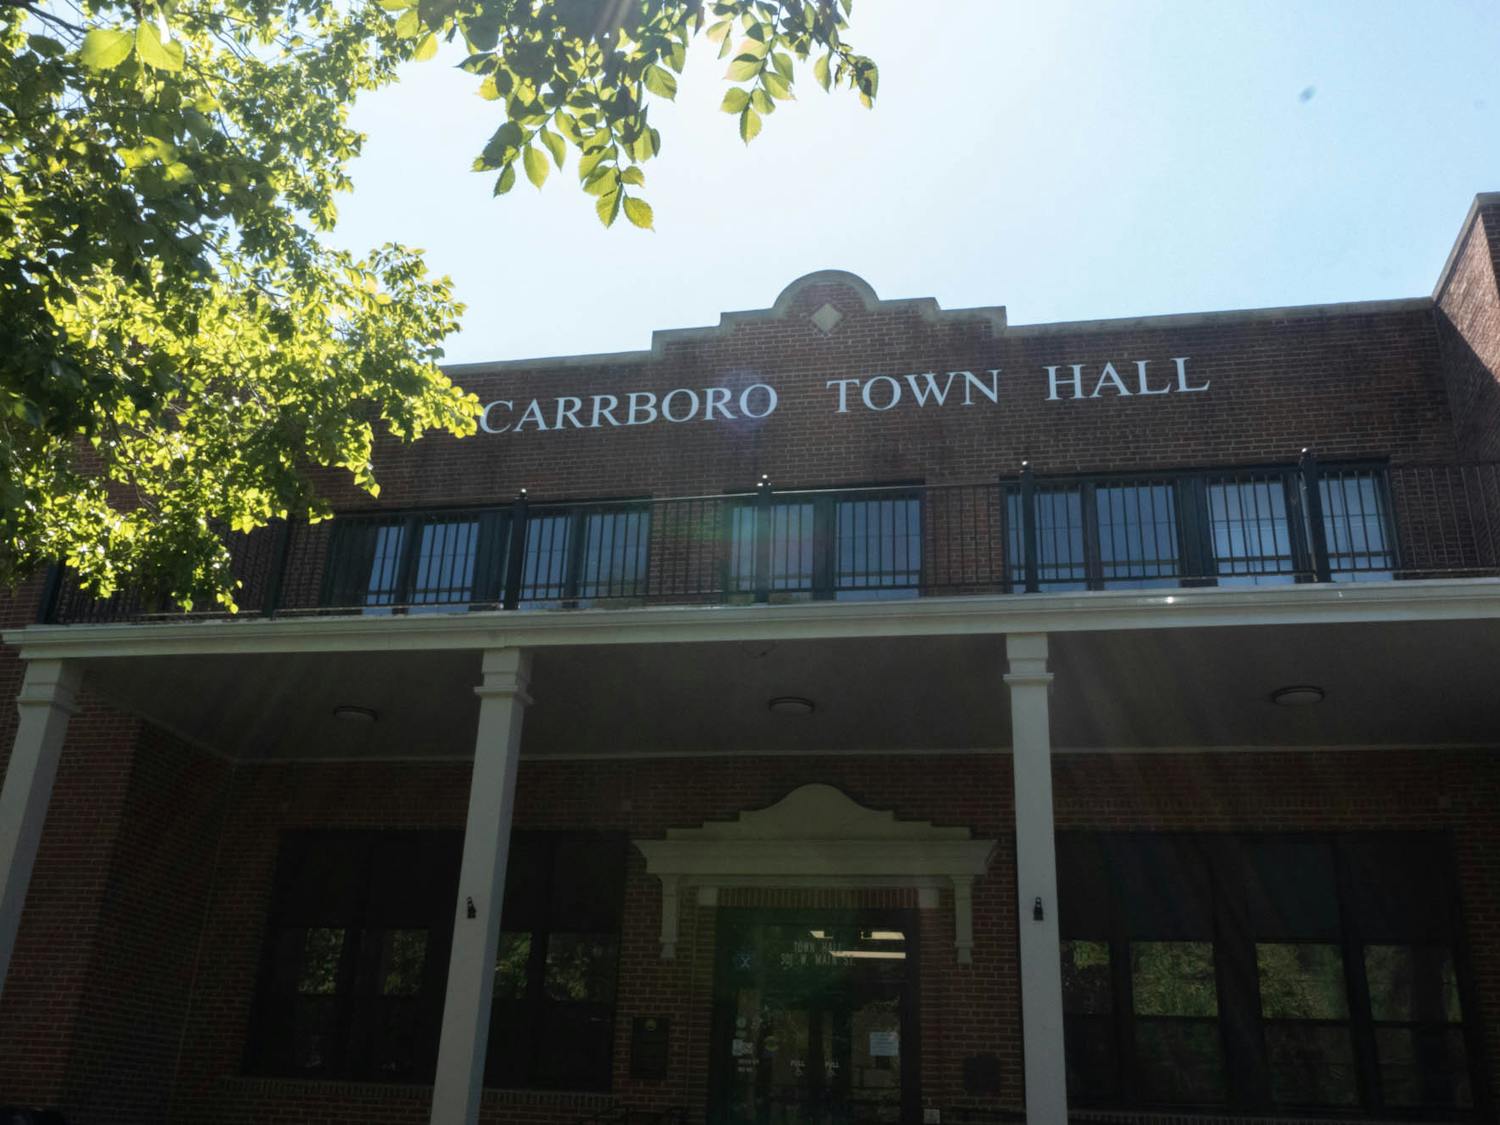 You_20230915_city-carrboro-town-council-preview-update-9.jpg